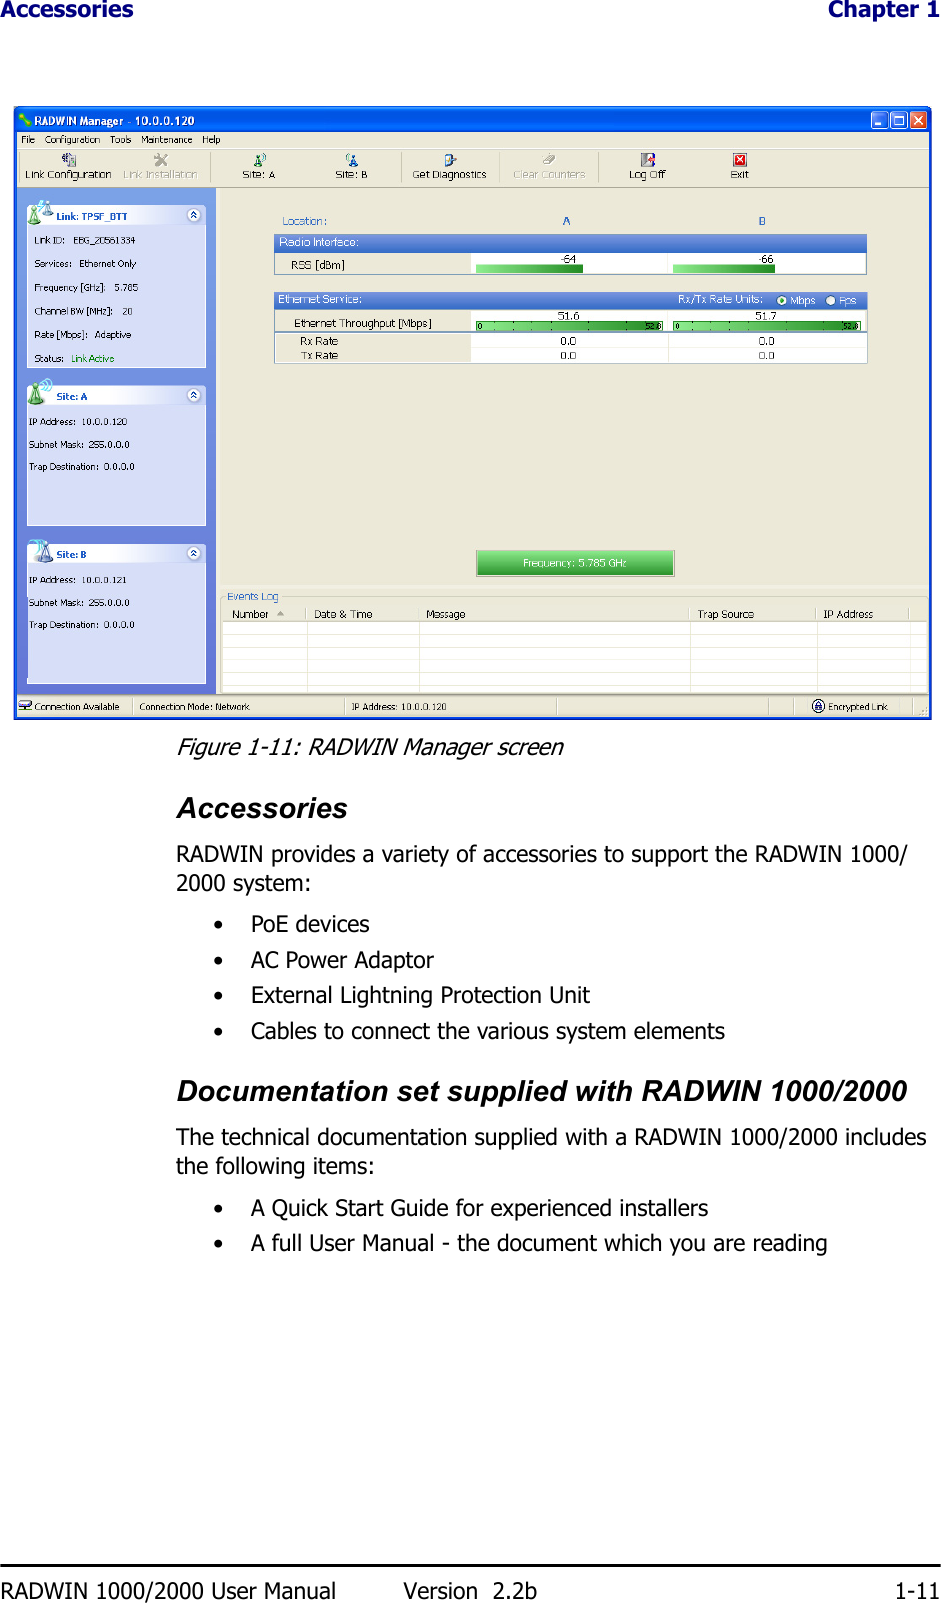 Accessories  Chapter 1RADWIN 1000/2000 User Manual Version  2.2b 1-11Figure 1-11: RADWIN Manager screenAccessoriesRADWIN provides a variety of accessories to support the RADWIN 1000/2000 system:•PoE devices•AC Power Adaptor• External Lightning Protection Unit• Cables to connect the various system elementsDocumentation set supplied with RADWIN 1000/2000The technical documentation supplied with a RADWIN 1000/2000 includes the following items:• A Quick Start Guide for experienced installers• A full User Manual - the document which you are reading